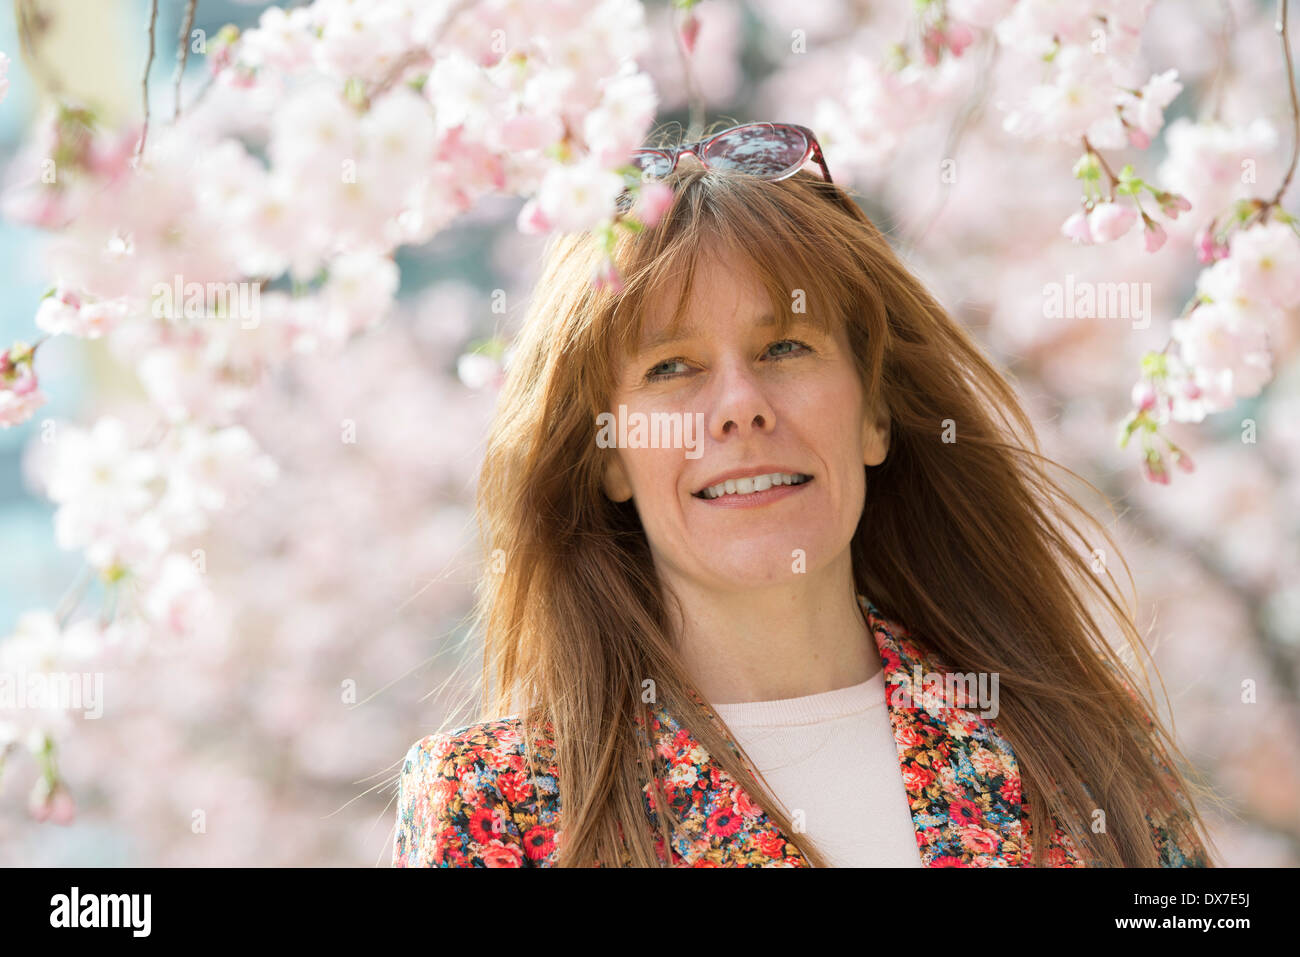 A woman with the cherry blossom on the trees in Oozells Square, Brindleyplace, Birmingham. Stock Photo